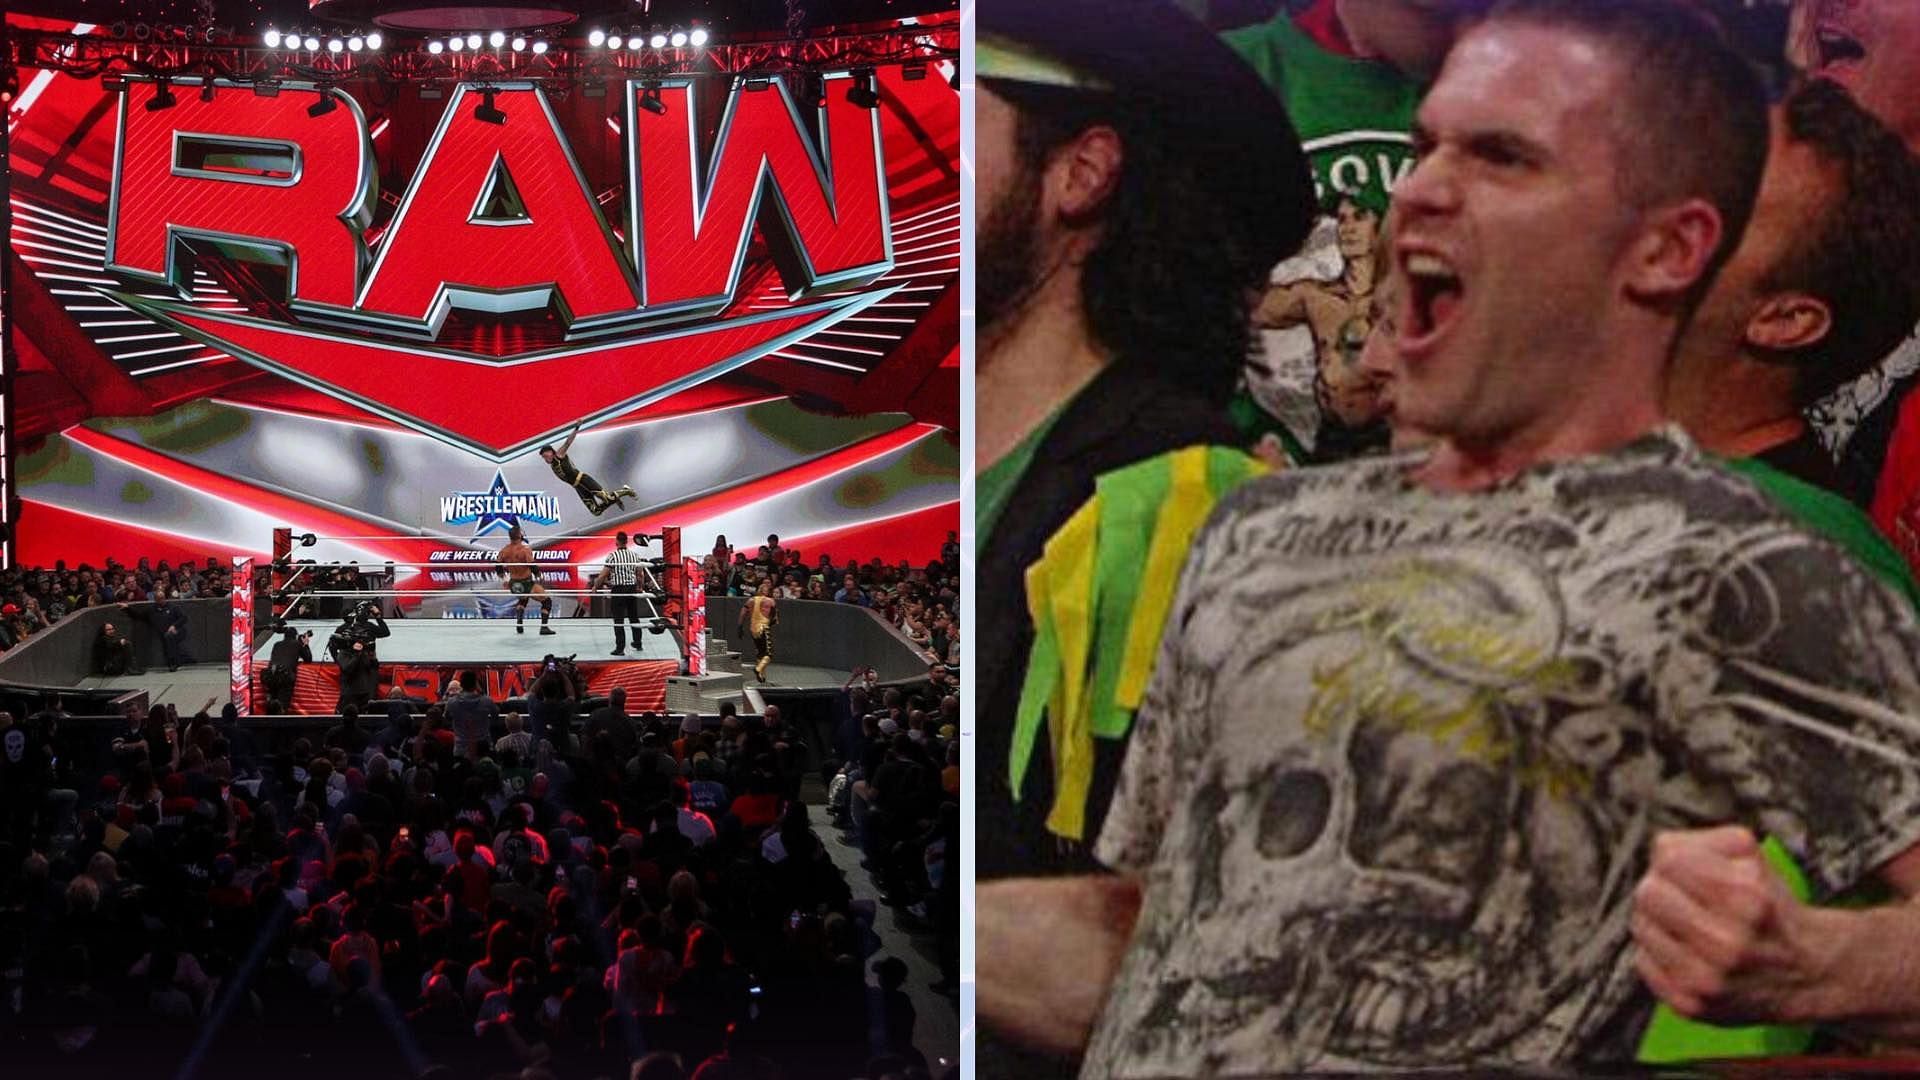 WWE RAW this week was live from the PNC Arena in Raleigh, North Carolina